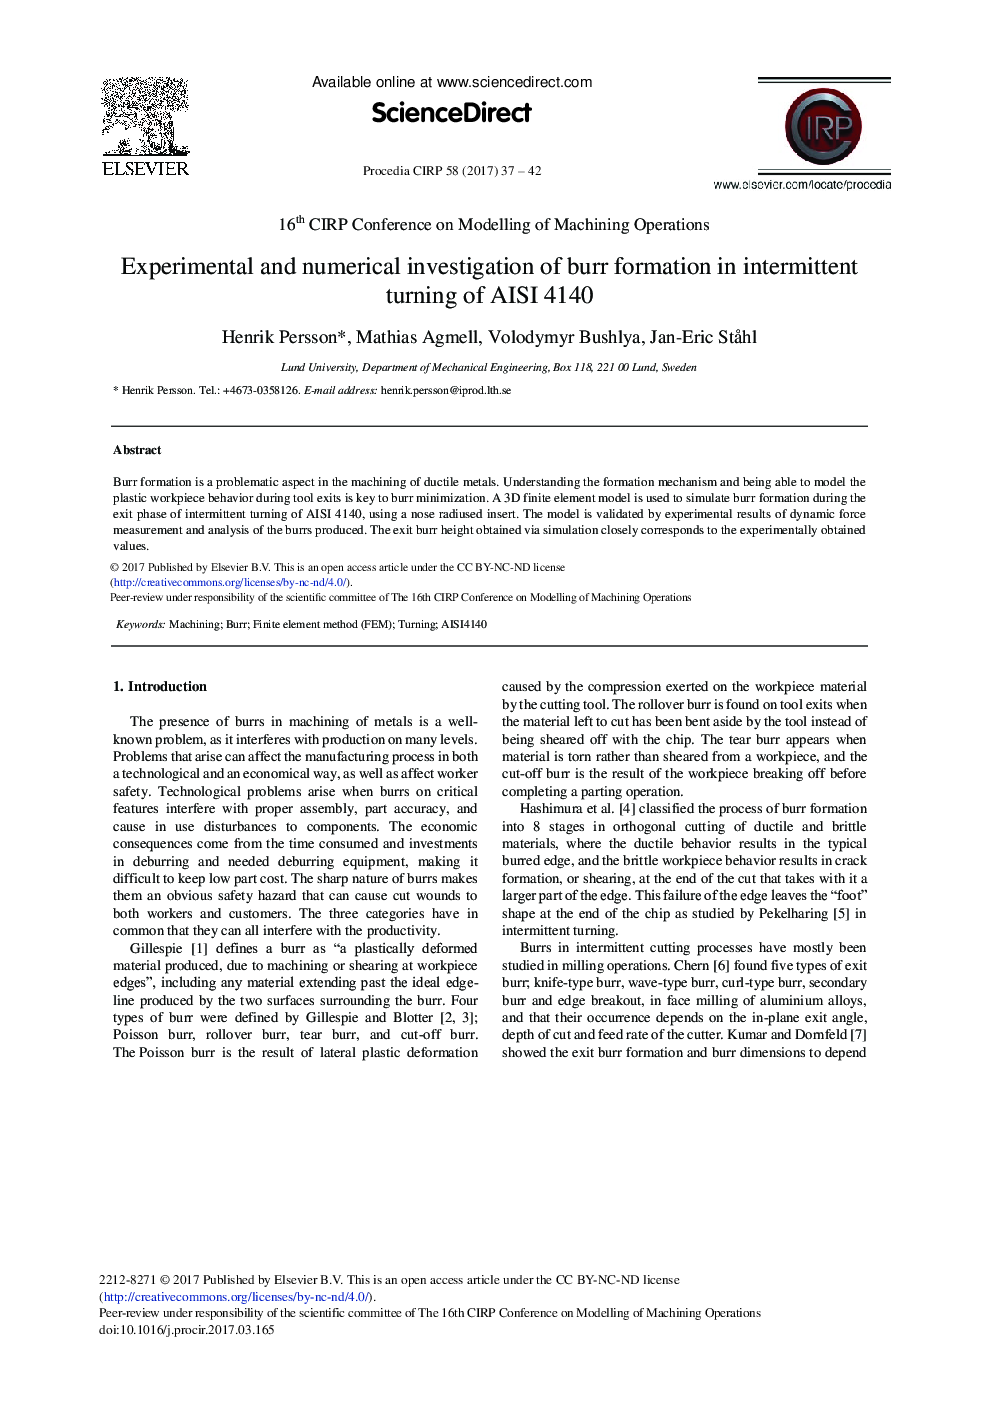 Experimental and Numerical Investigation of Burr Formation in Intermittent Turning of AISI 4140